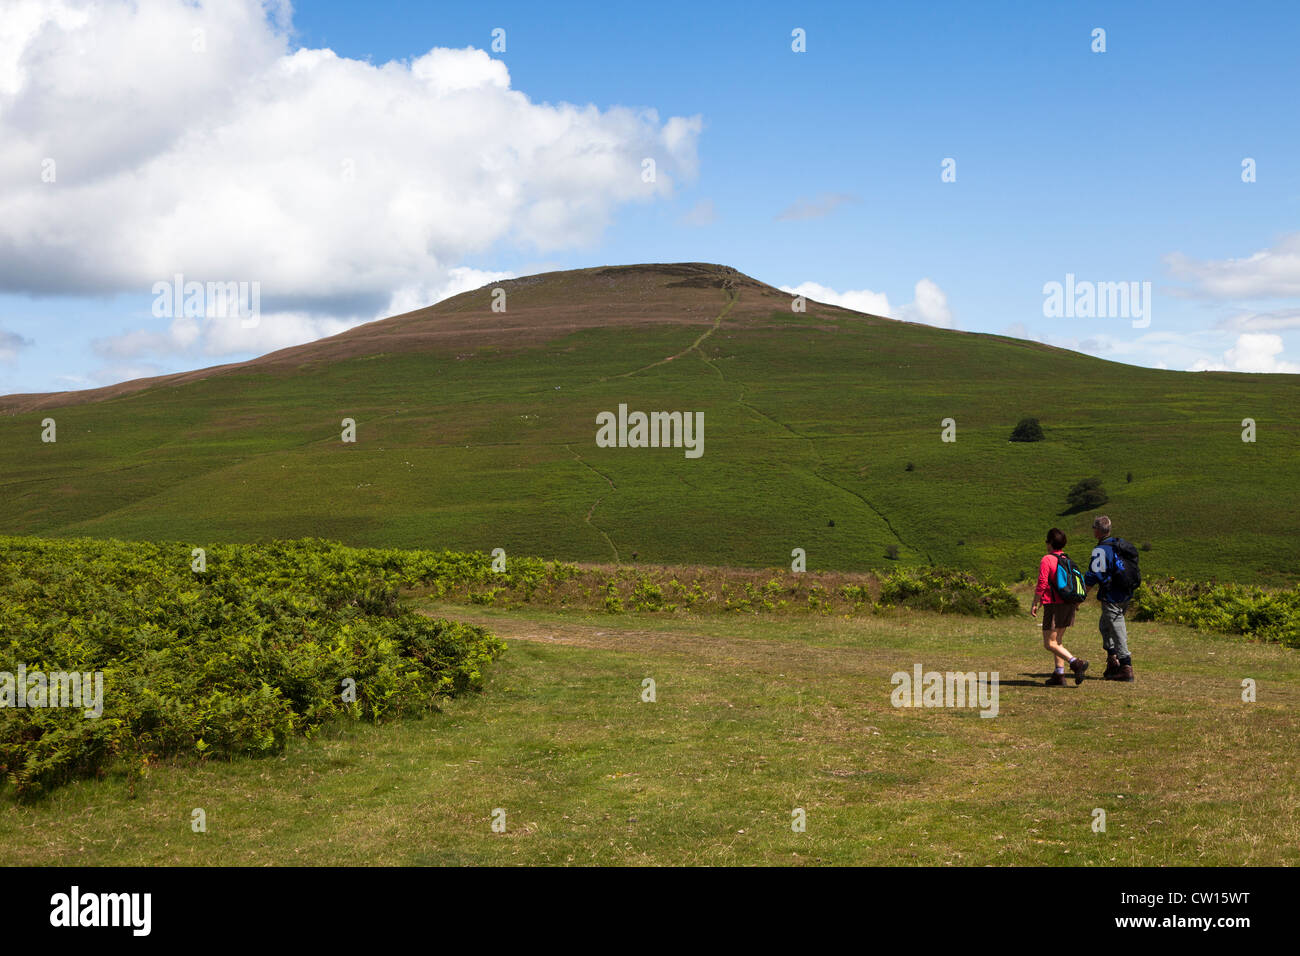 Two people walking on the Sugar Loaf mountain, Abergavenny, Wales, UK Stock Photo